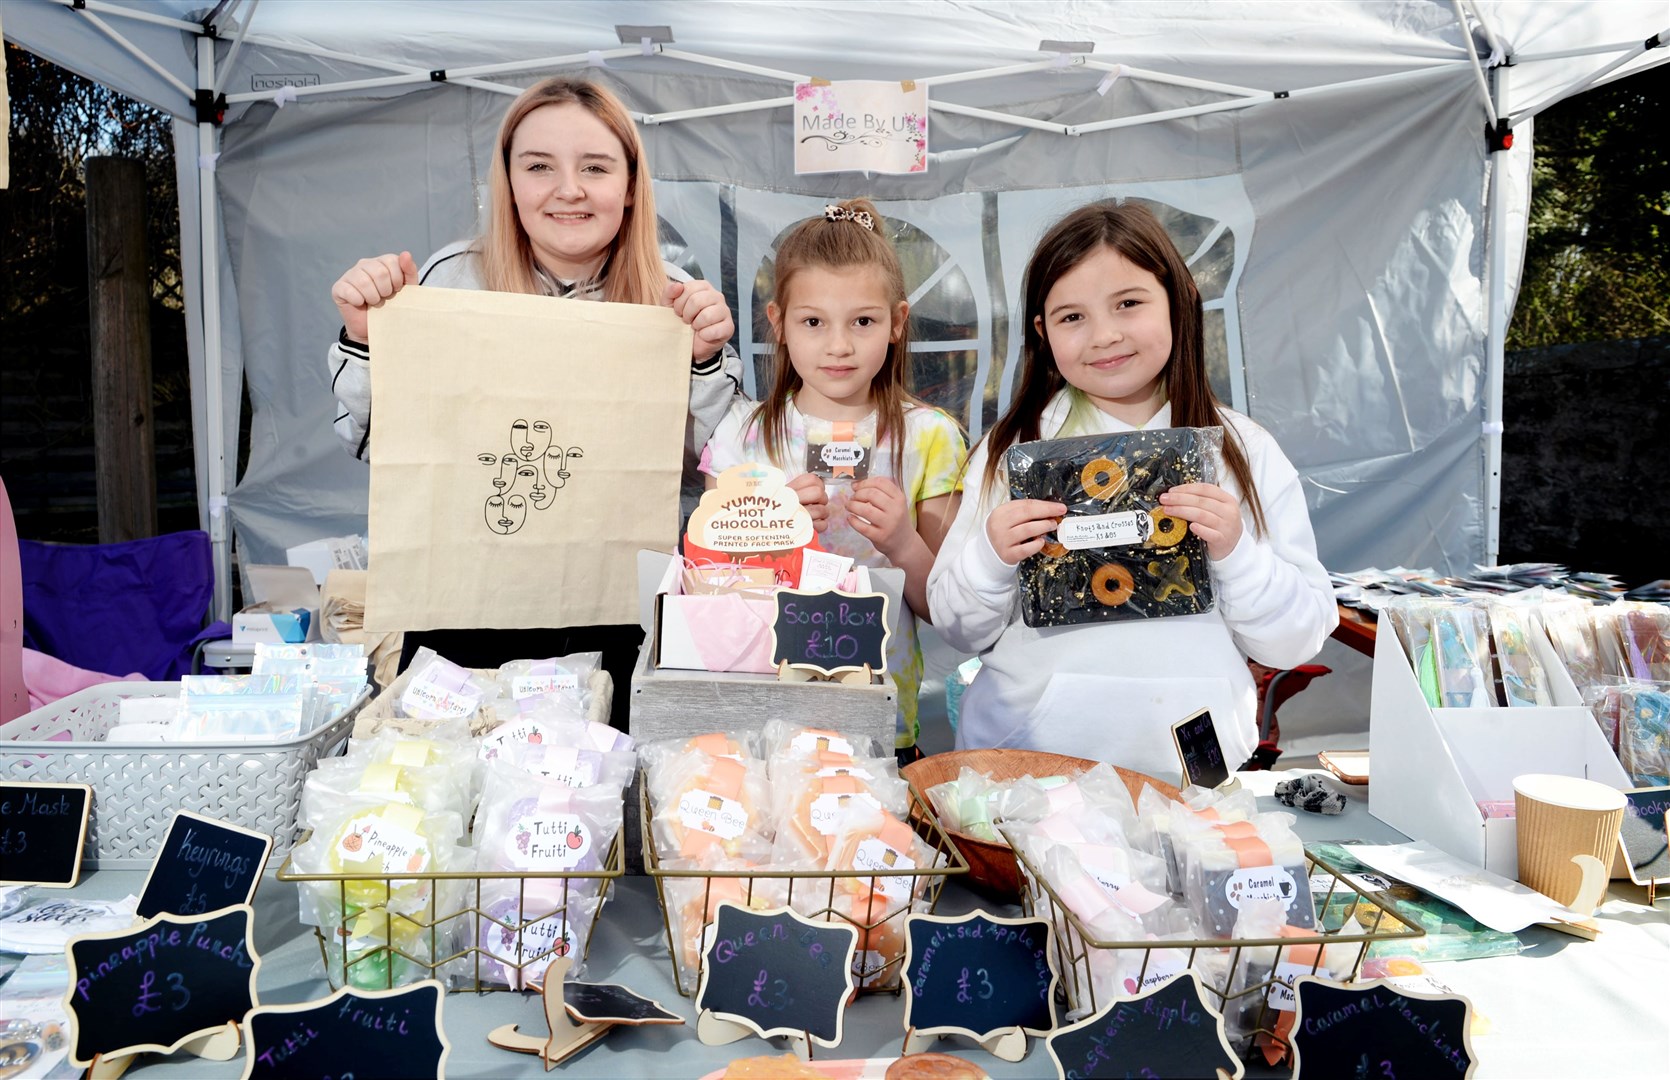 Isla Matheson (13), Freya Maclean (8) and Amelia Maclean (8) with the products they created at the Made by Us stall. Picture: James Mackenzie